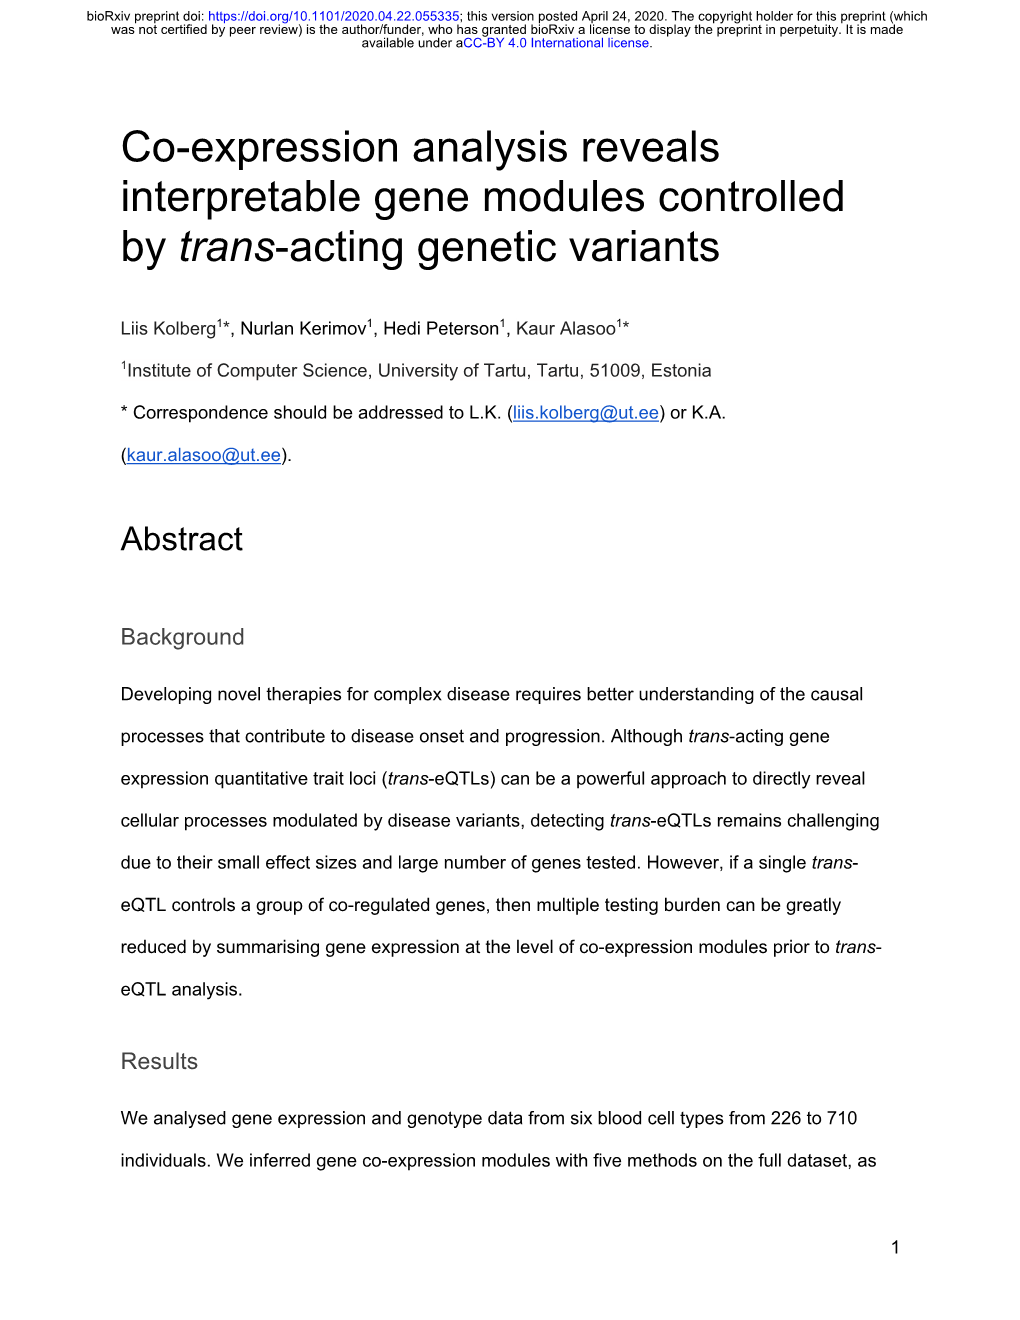 Co-Expression Analysis Reveals Interpretable Gene Modules Controlled by Trans-Acting Genetic Variants